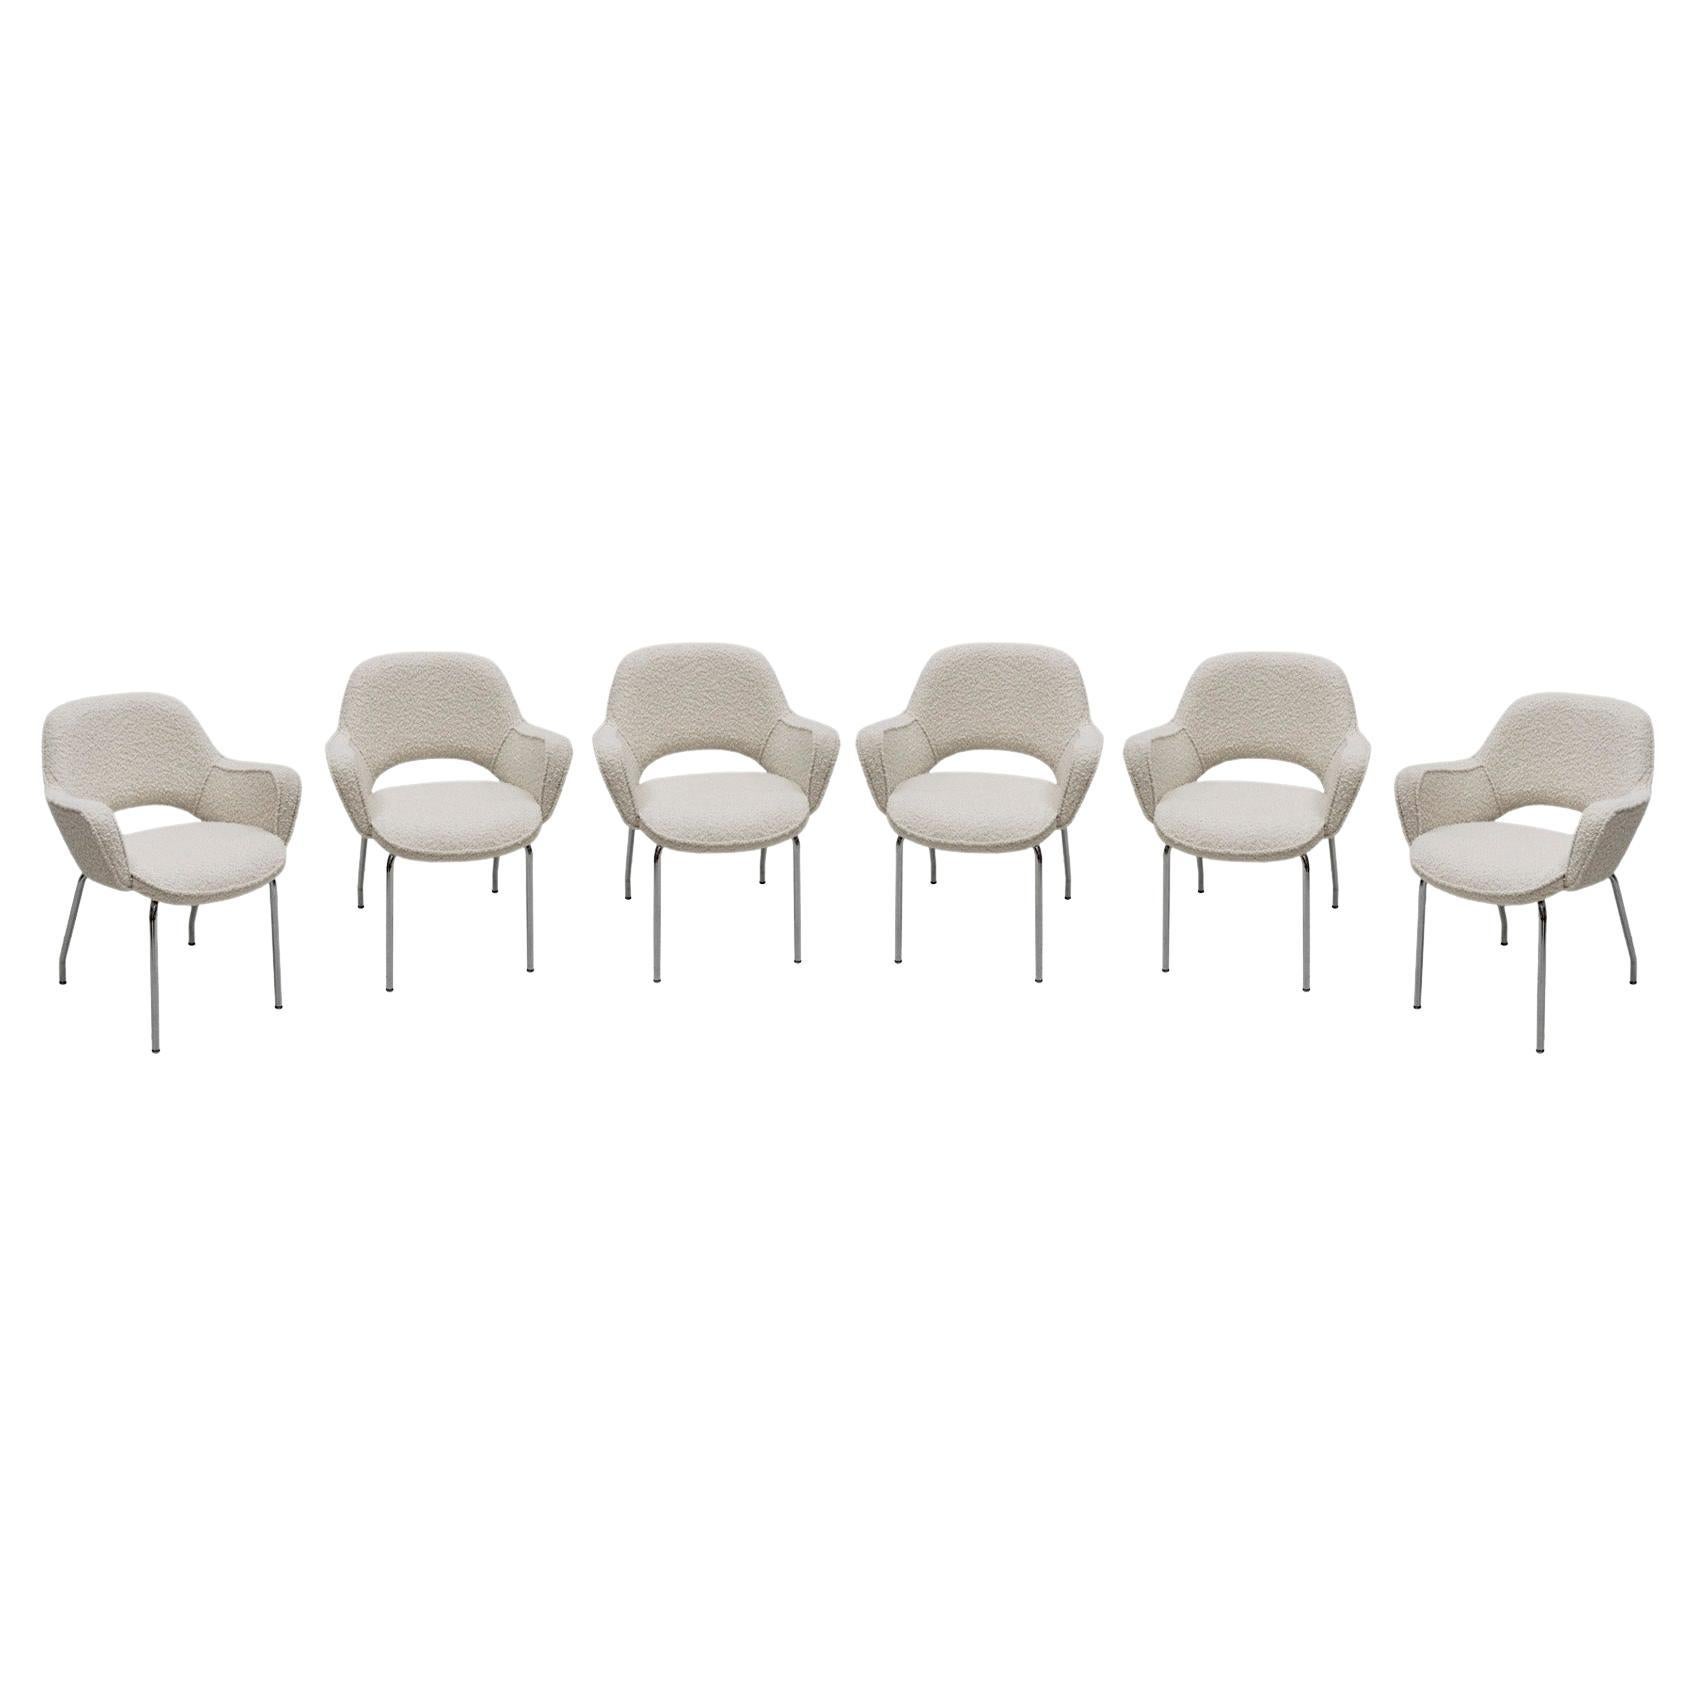 Set of 6 Executive Armchairs Designed By Eero Saarinen for Knoll For Sale